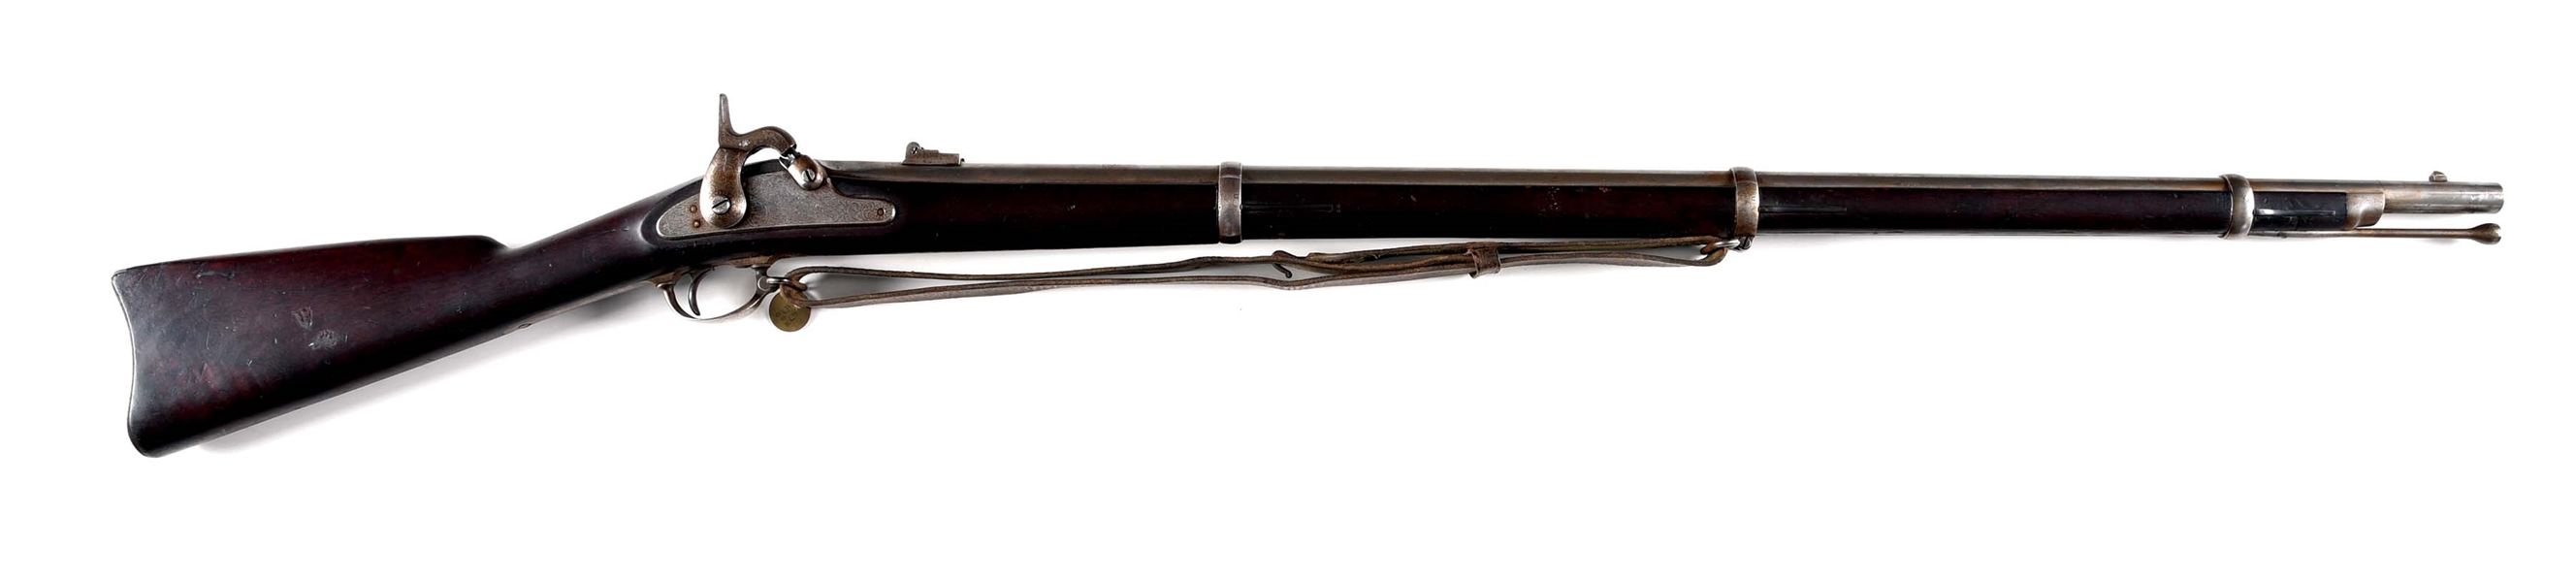 (A) NORWICH ARMS MODEL 1861 RIFLE MUSKET.